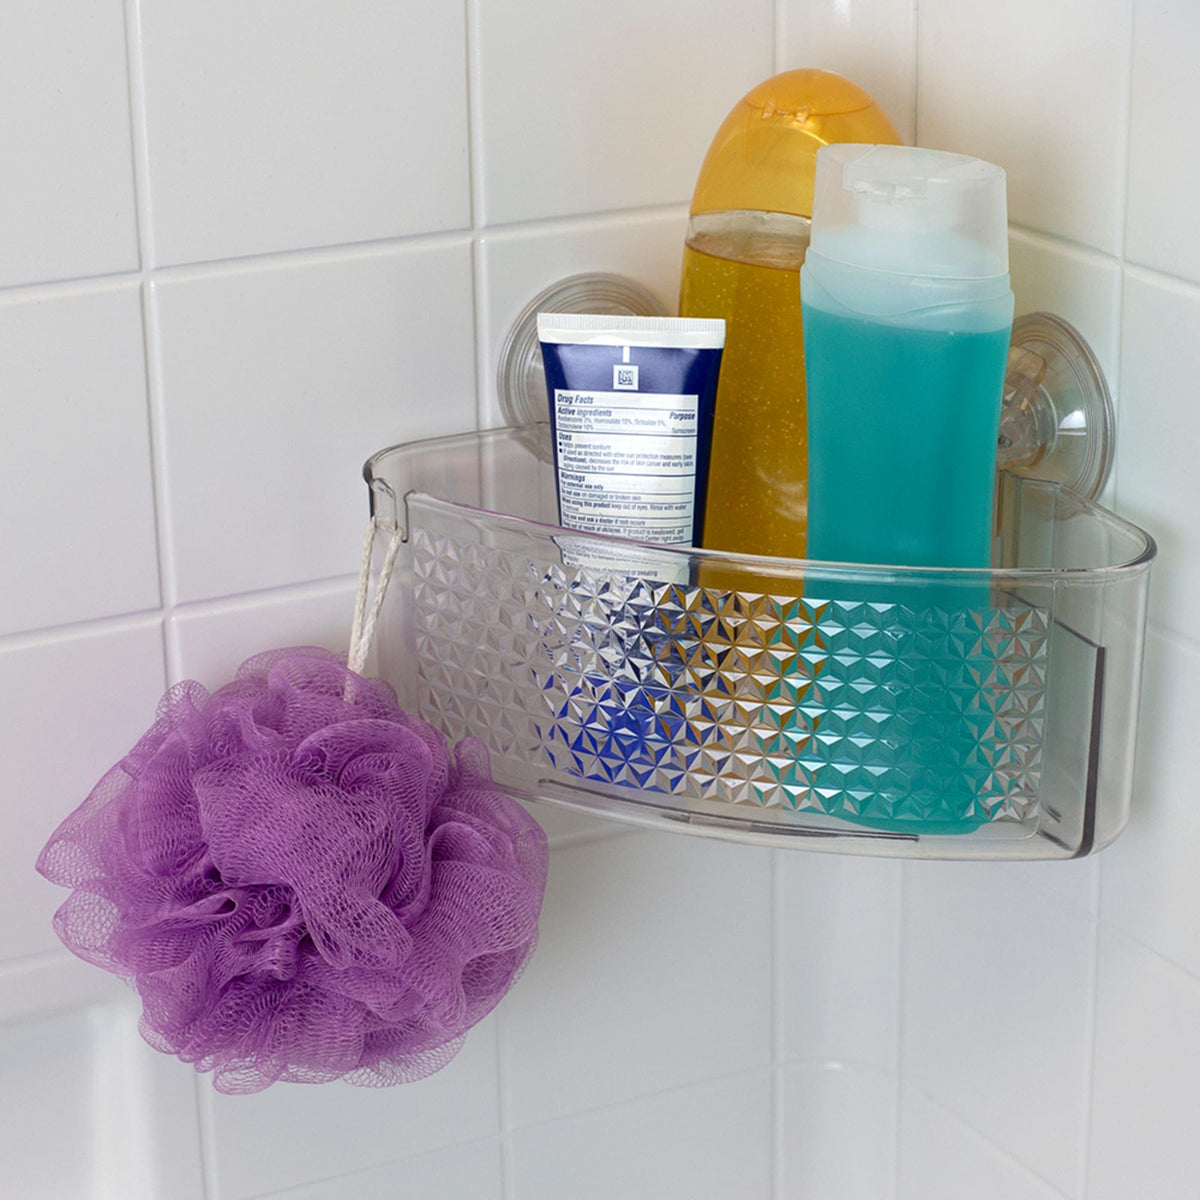 Home Basics Clear Cubic Plastic Corner Shower Caddy with Suction